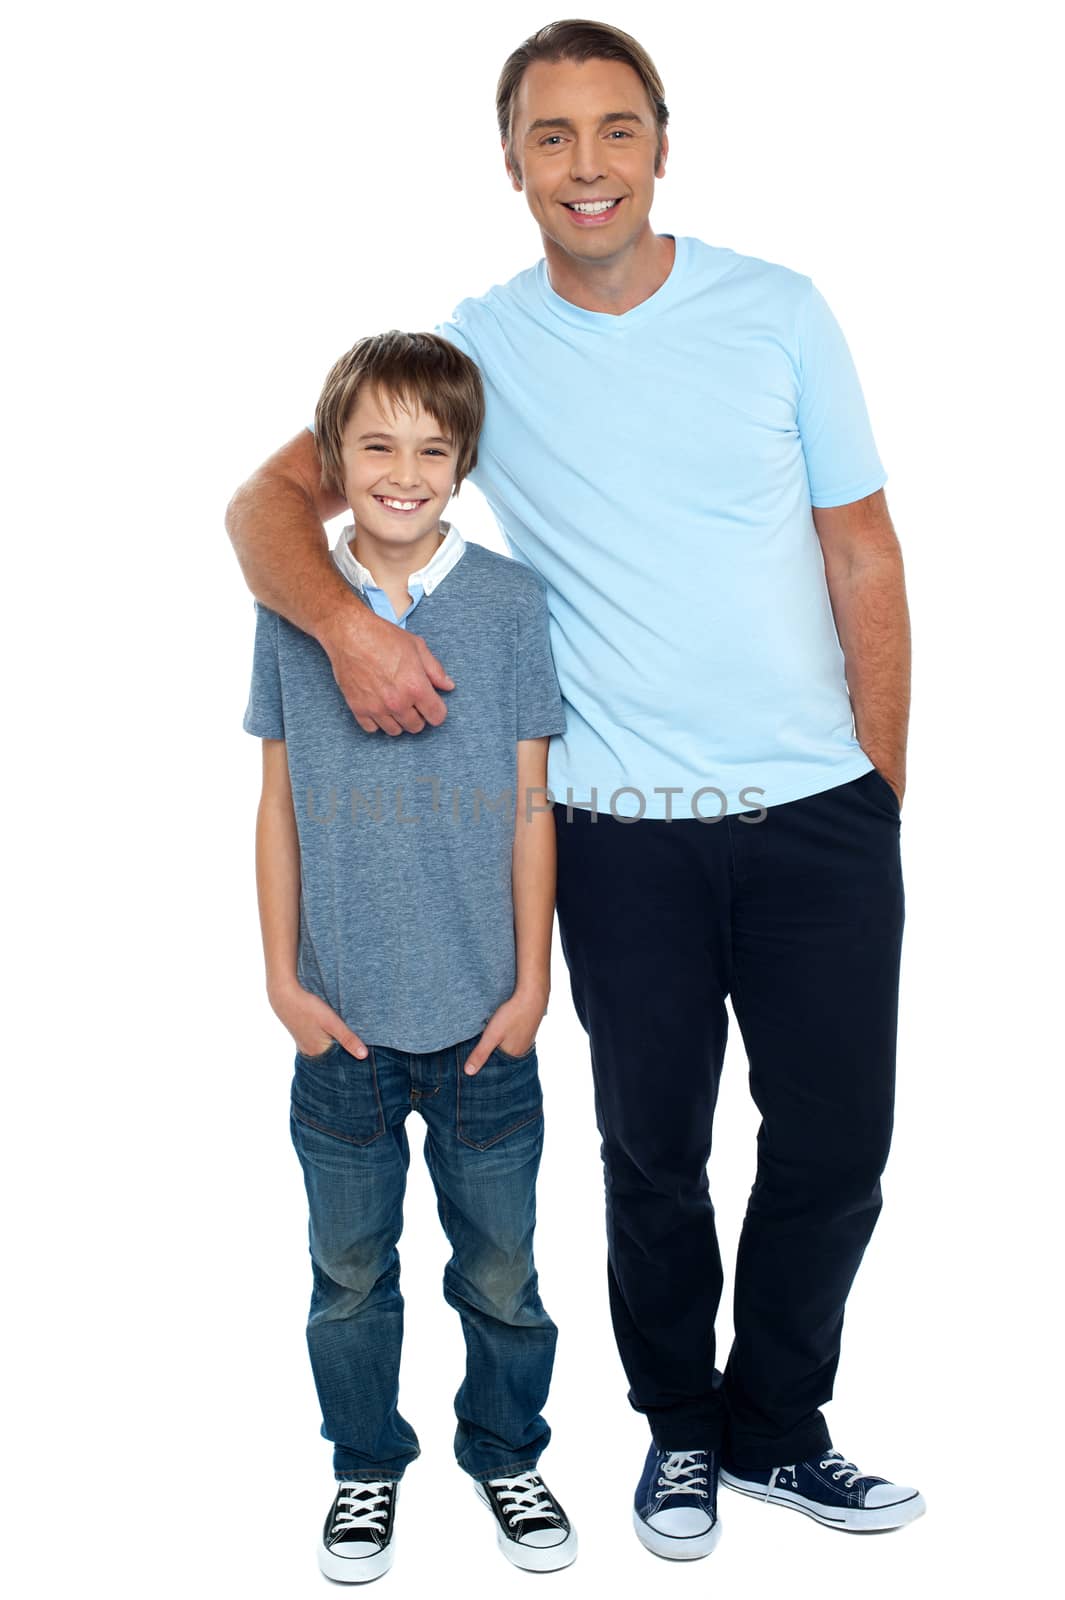 Smiling shot of a father and son by stockyimages